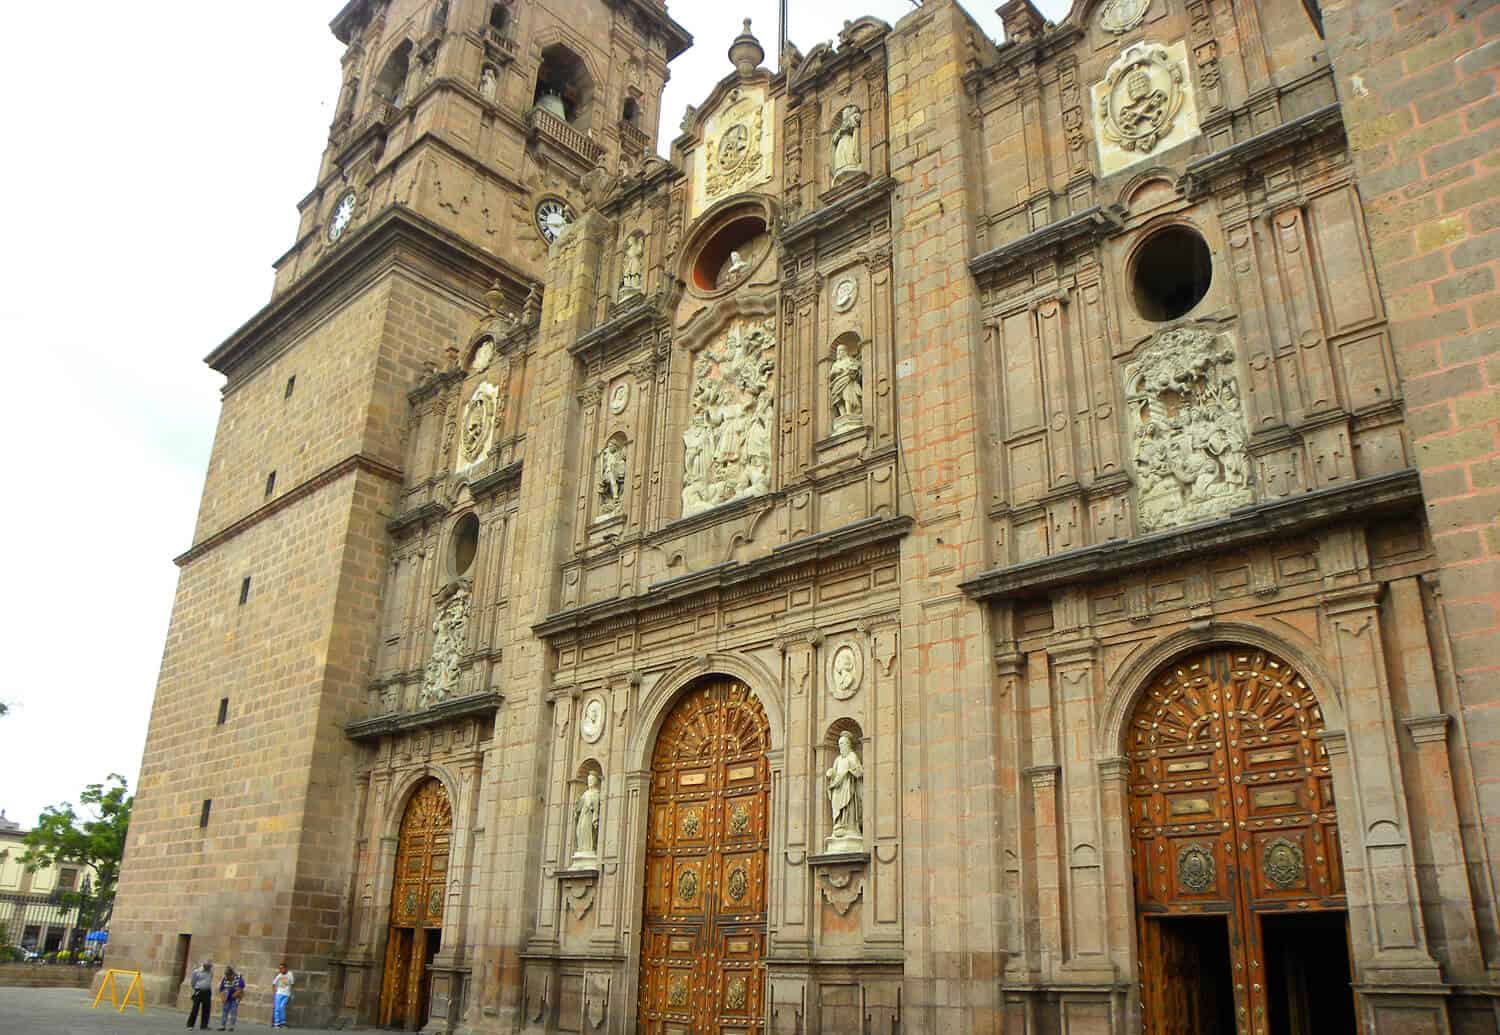 Morelia (Michoacán) and why even UNESCO listed world heritage sites can leave you feeling blah